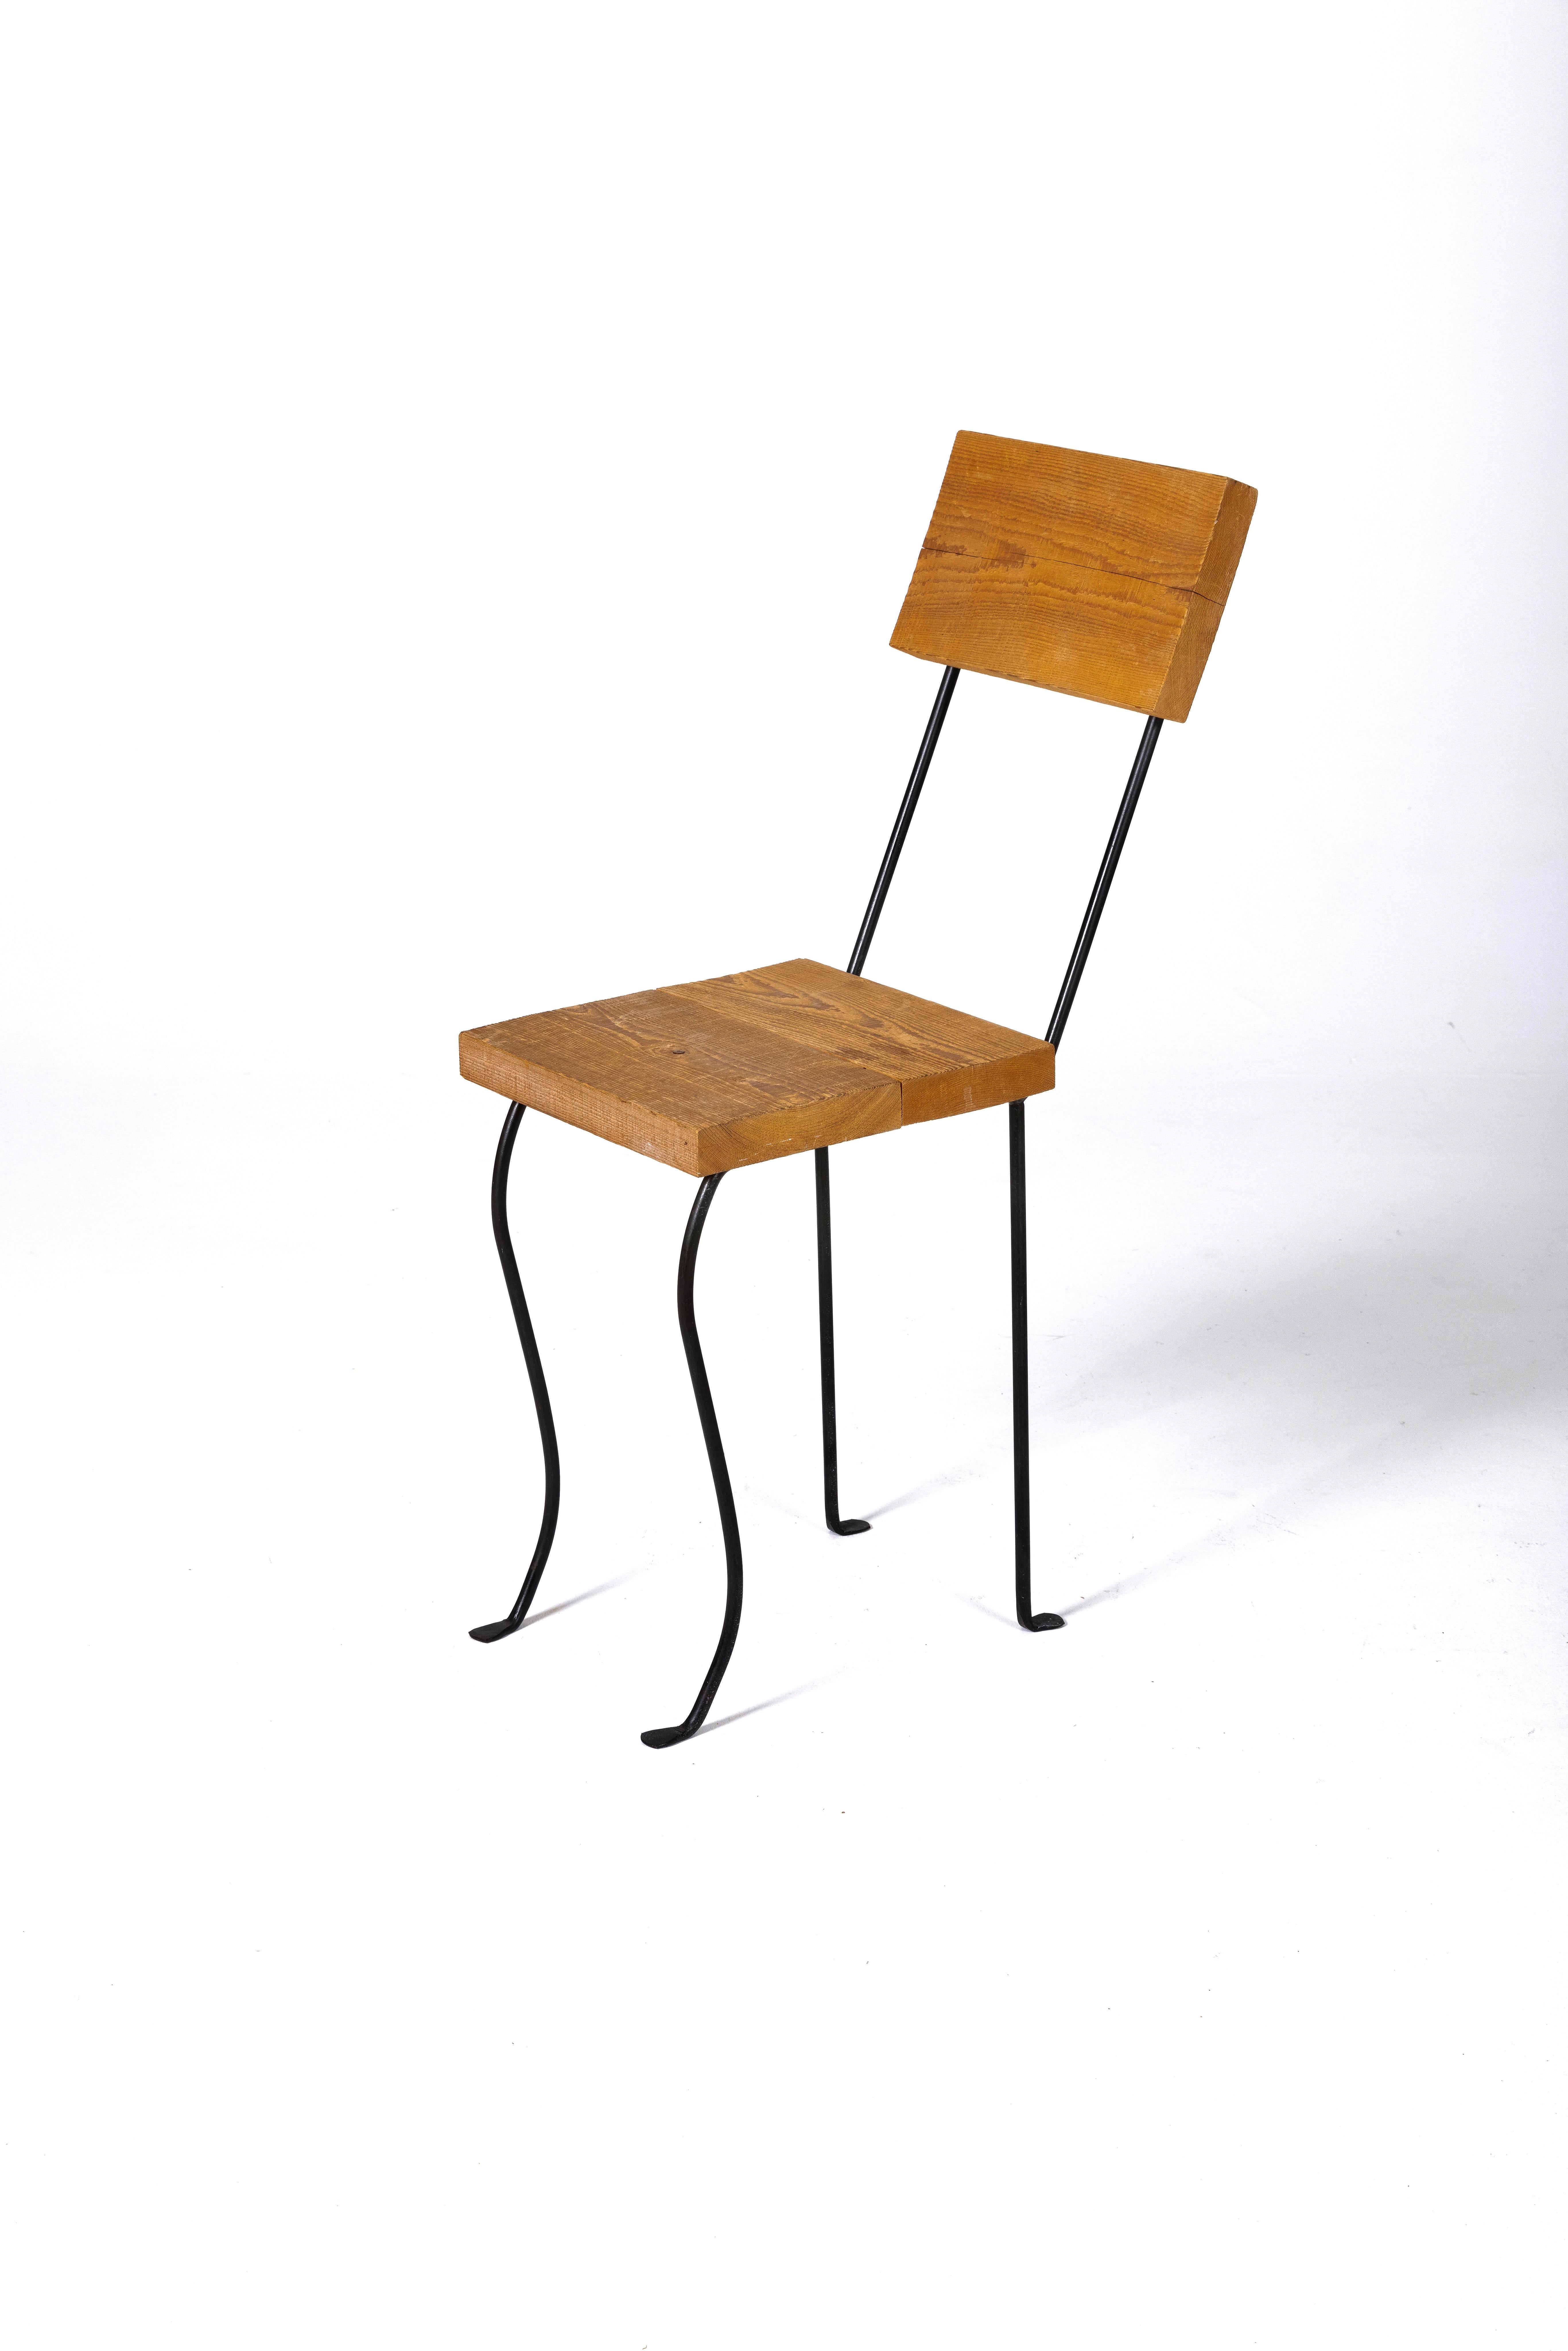 20th Century Wood and metal chair by Patrice Gruffaz For Sale